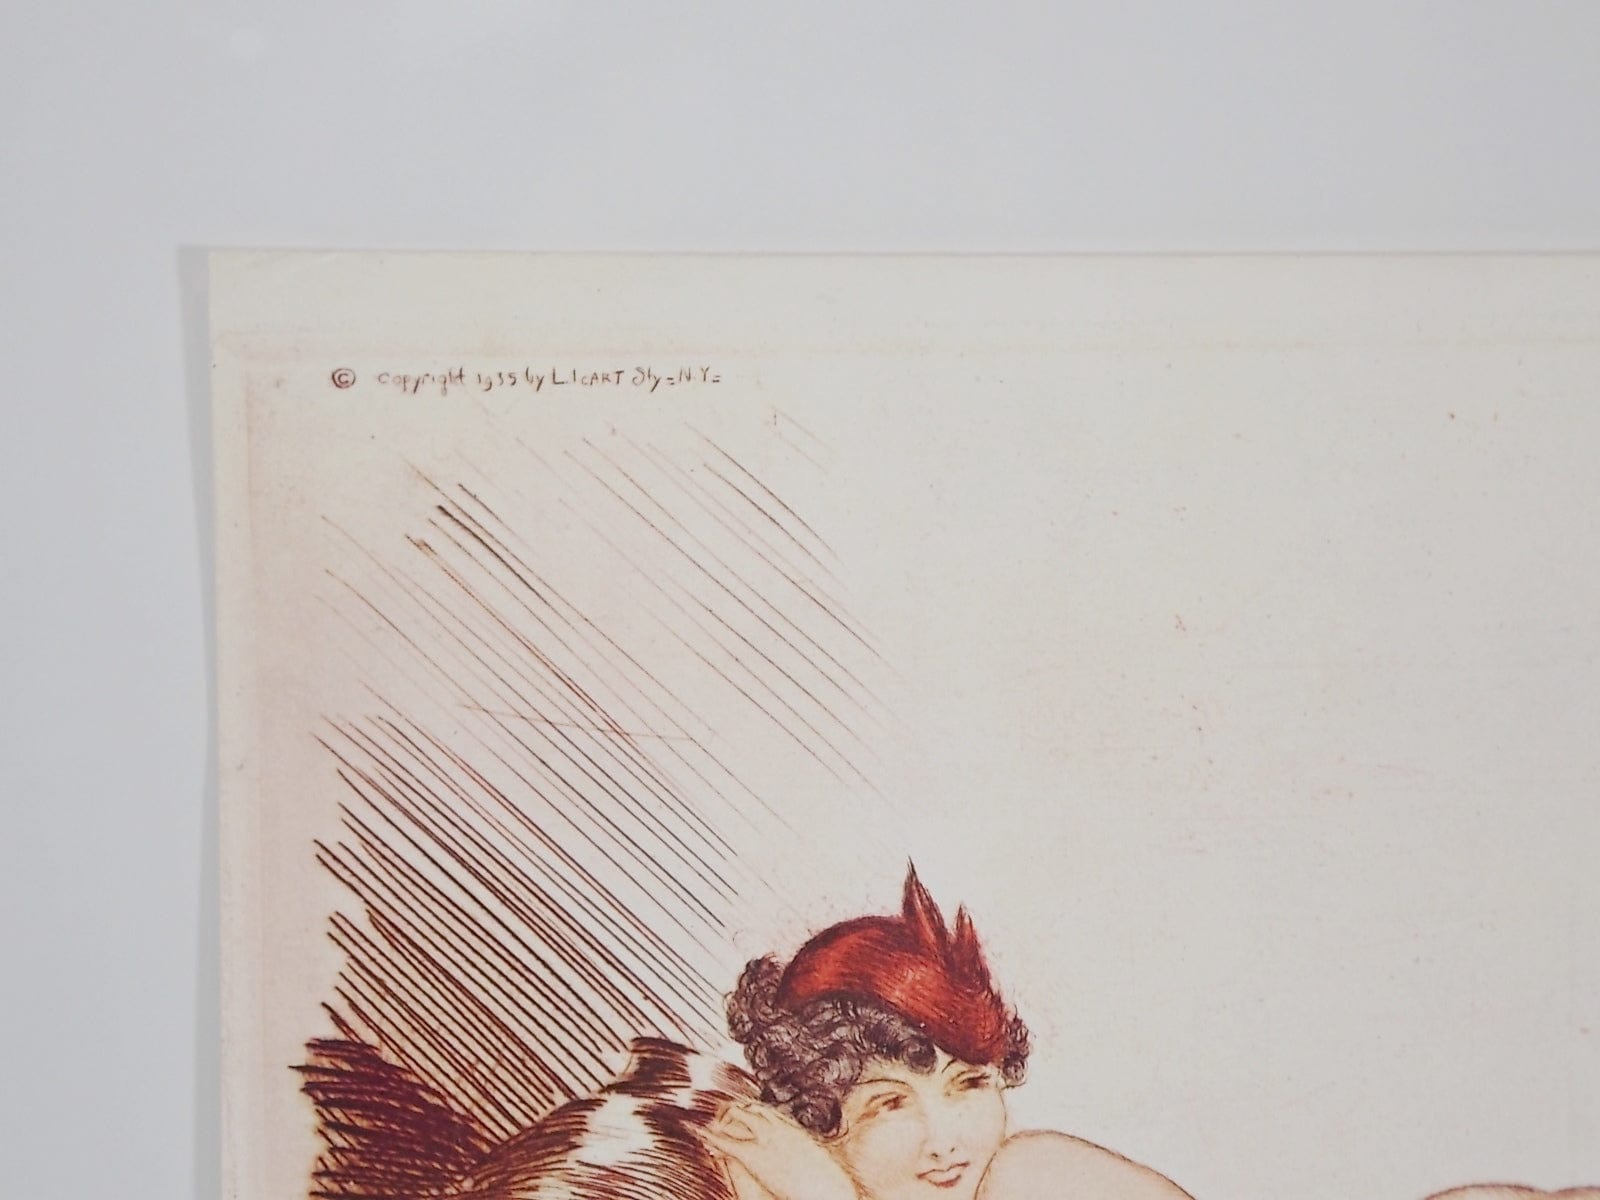 I Like Mike's Mid Century Modern Wall Decor & Art Louis Icart Print "Nu au Chapeau Rouge" (Nude with Red Hat) Art Deco, Reprint from 1979, Unframed